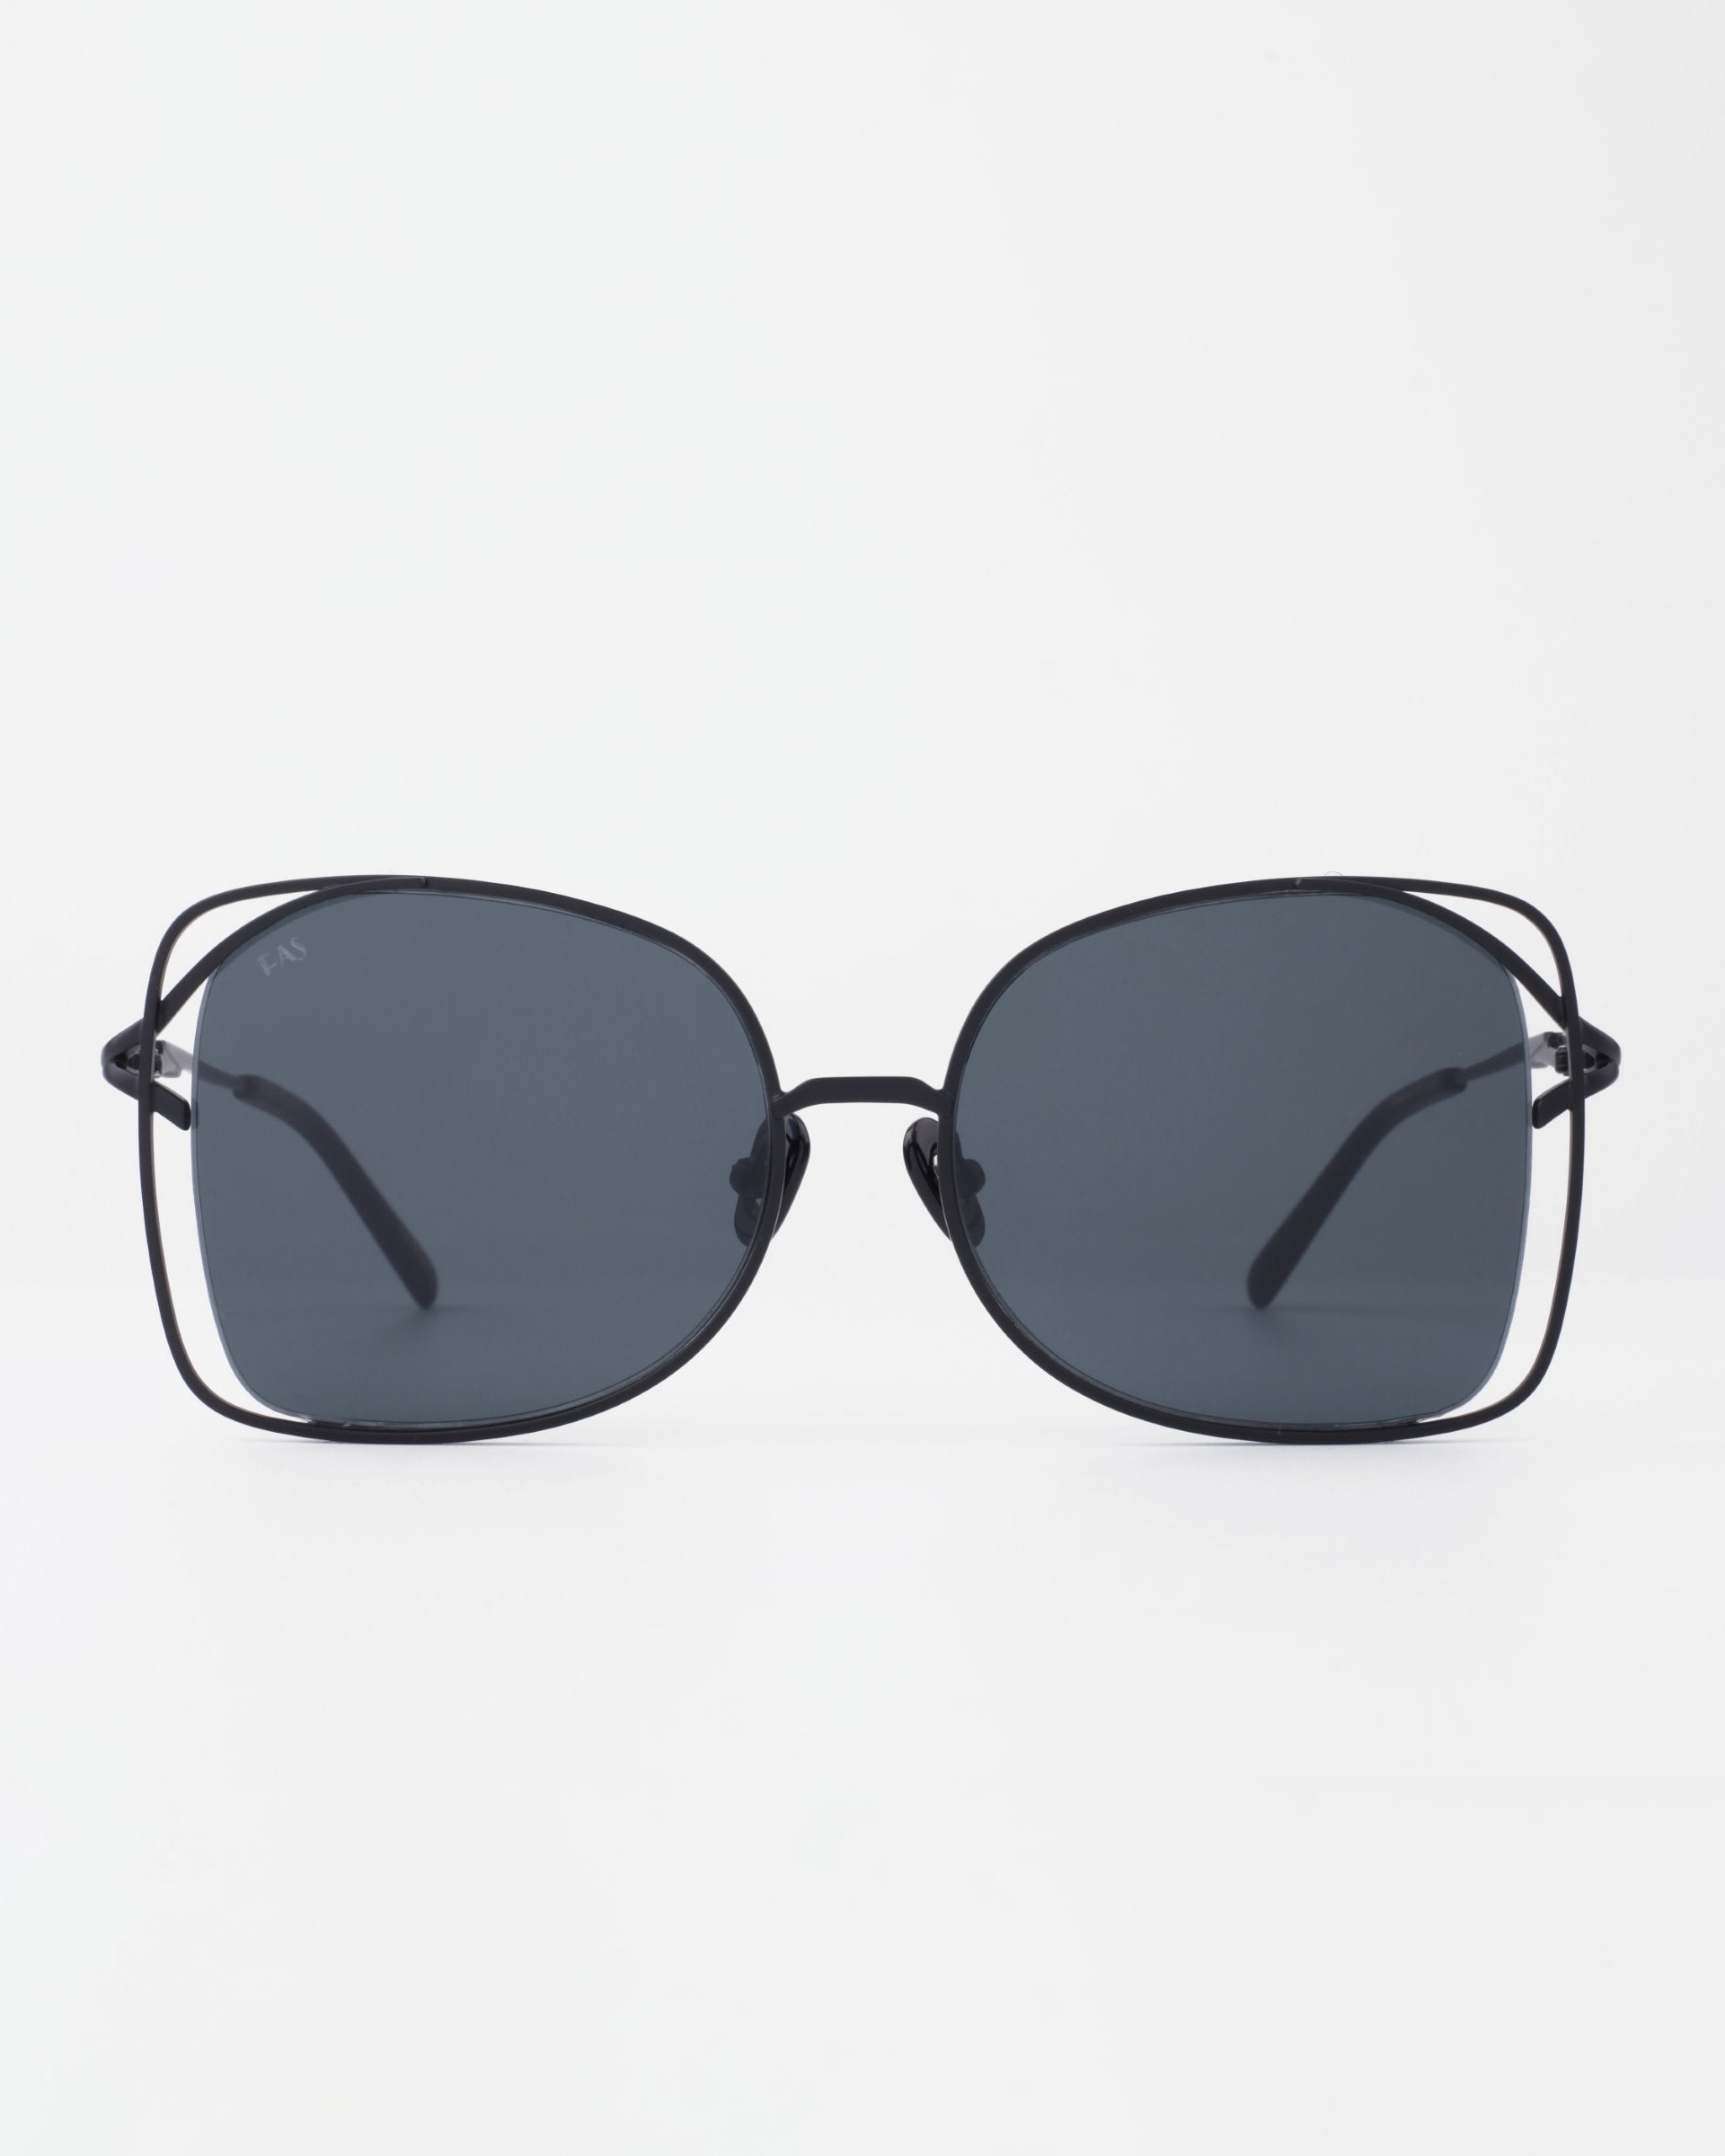 A pair of black-framed Carousel sunglasses by For Art's Sake® with large, slightly rounded square lenses and thin temples. The lenses are dark tinted, providing a sleek and stylish appearance with UVA & UVB protection. Handmade sunglasses crafted for elegance. The background is plain white.